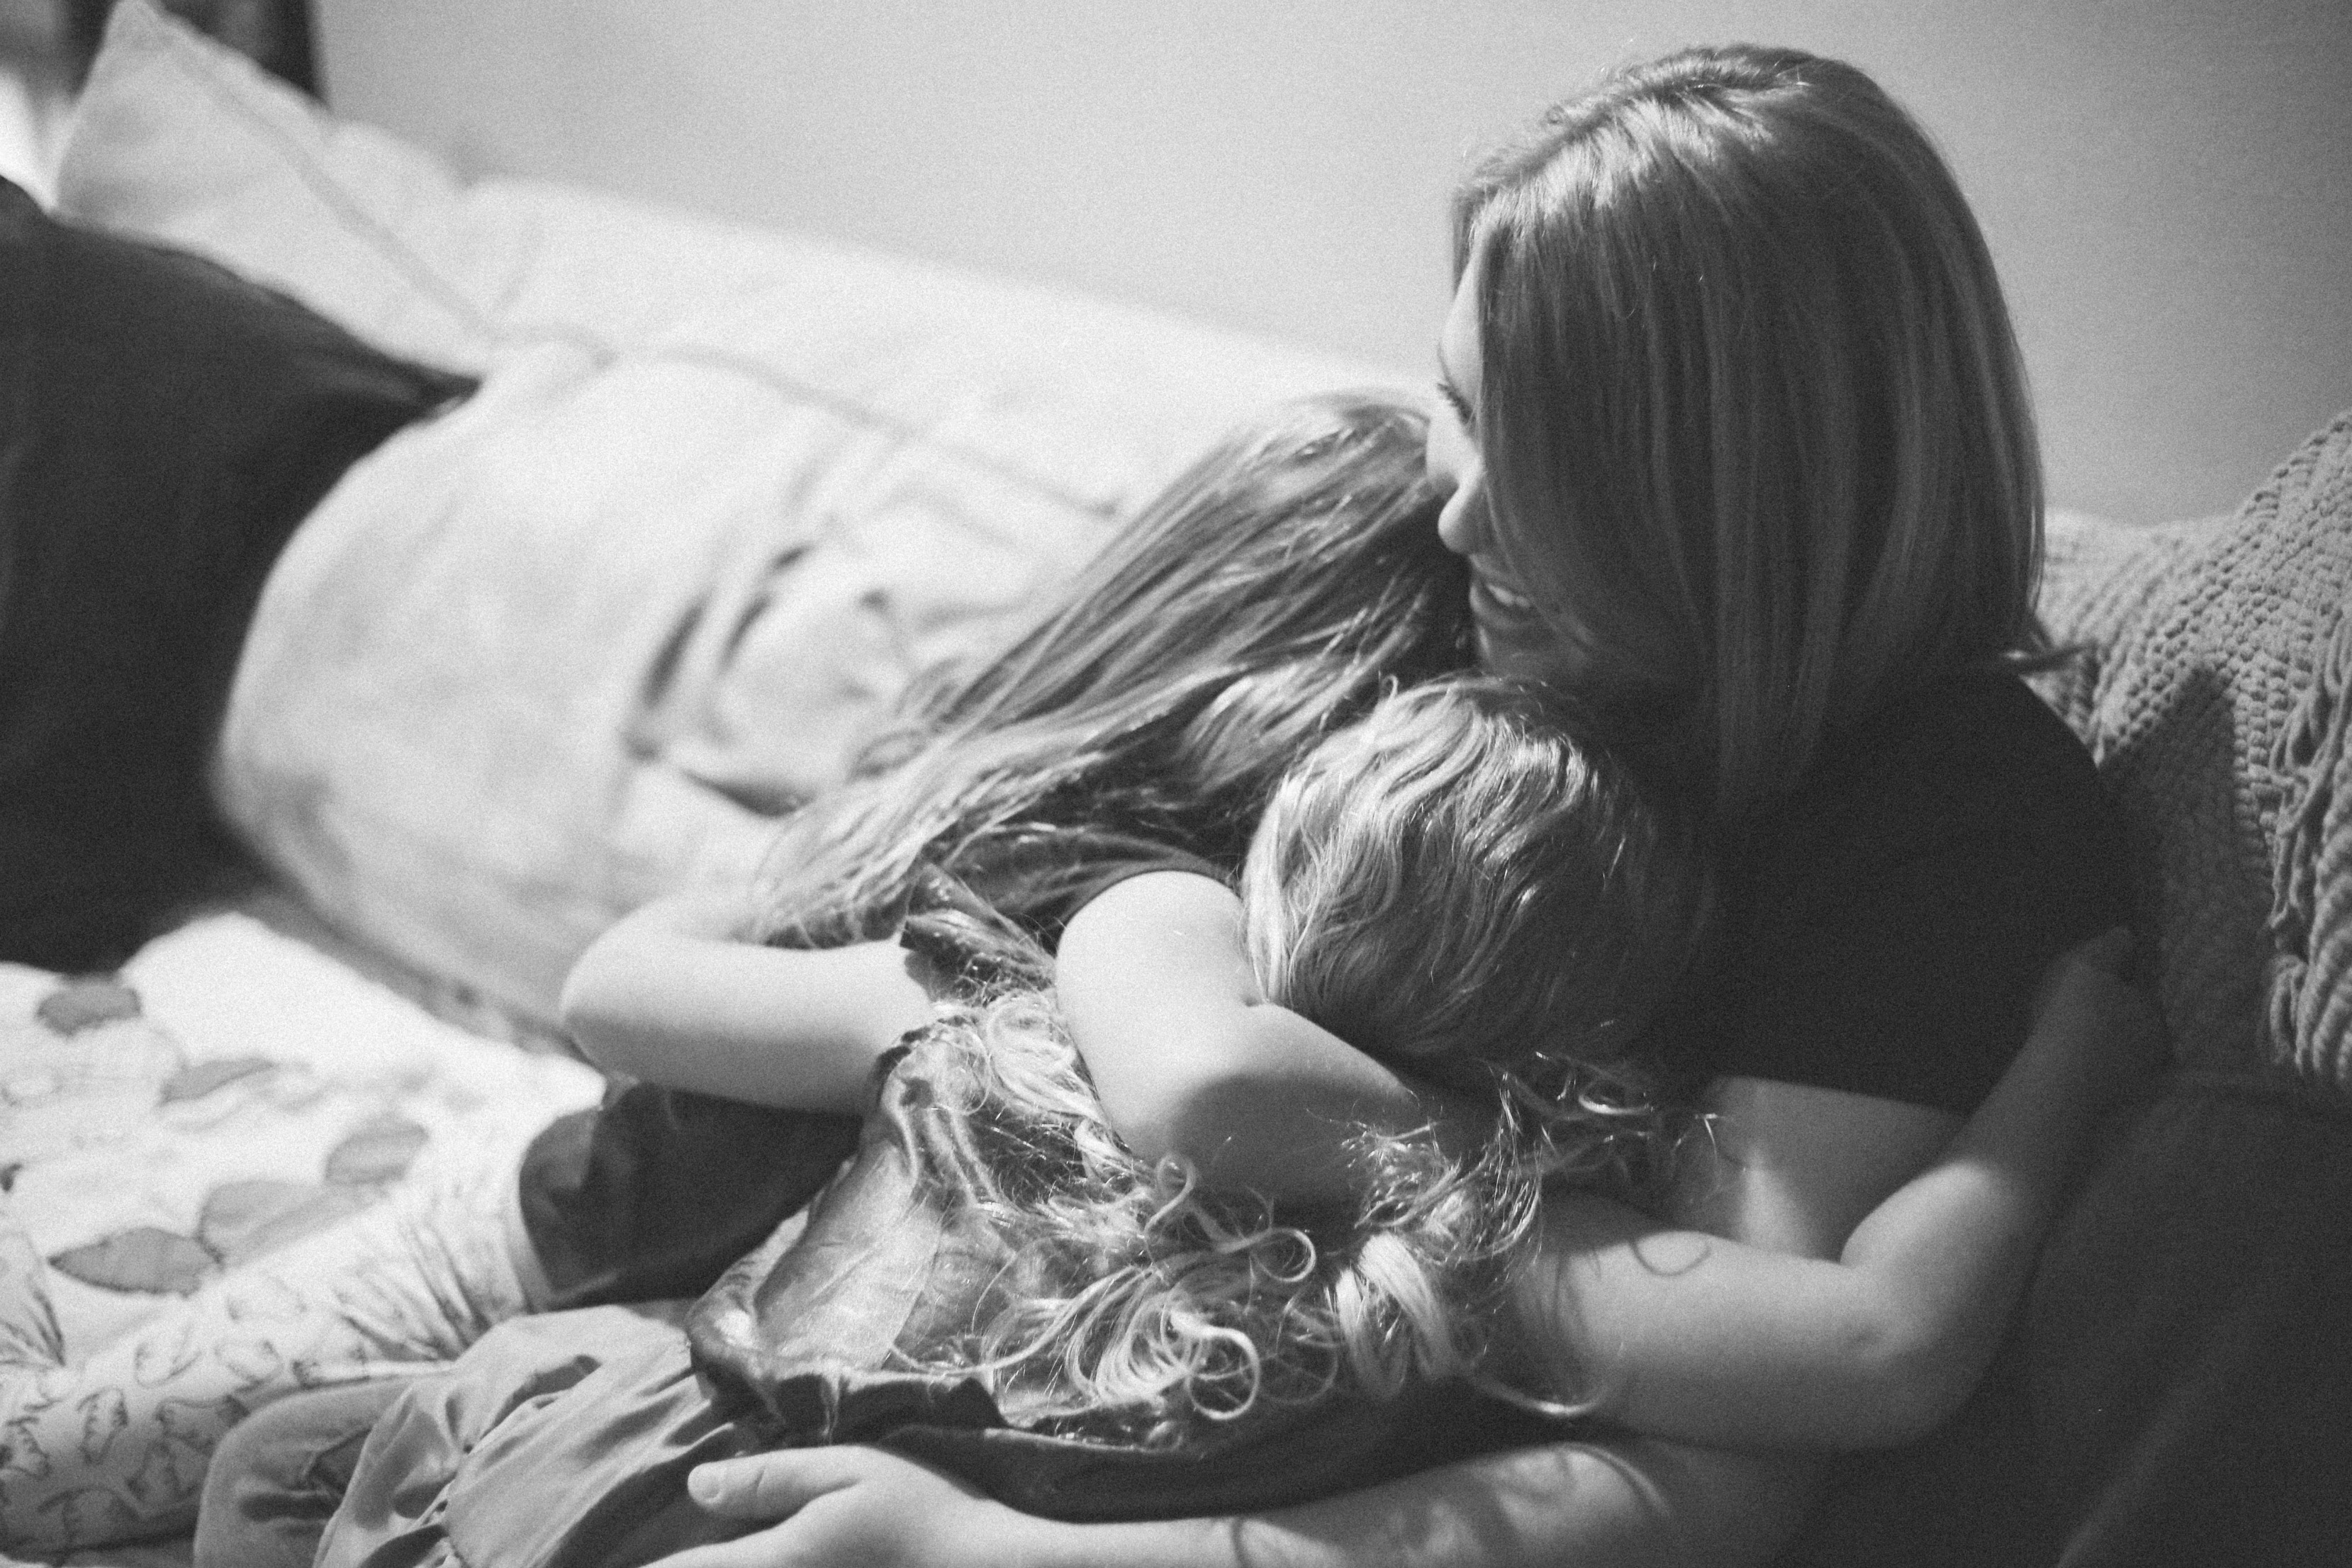 5 Life Lessons I Wish I Didn't have to Teach My Kids - Being a mom is hard. This post is so true!